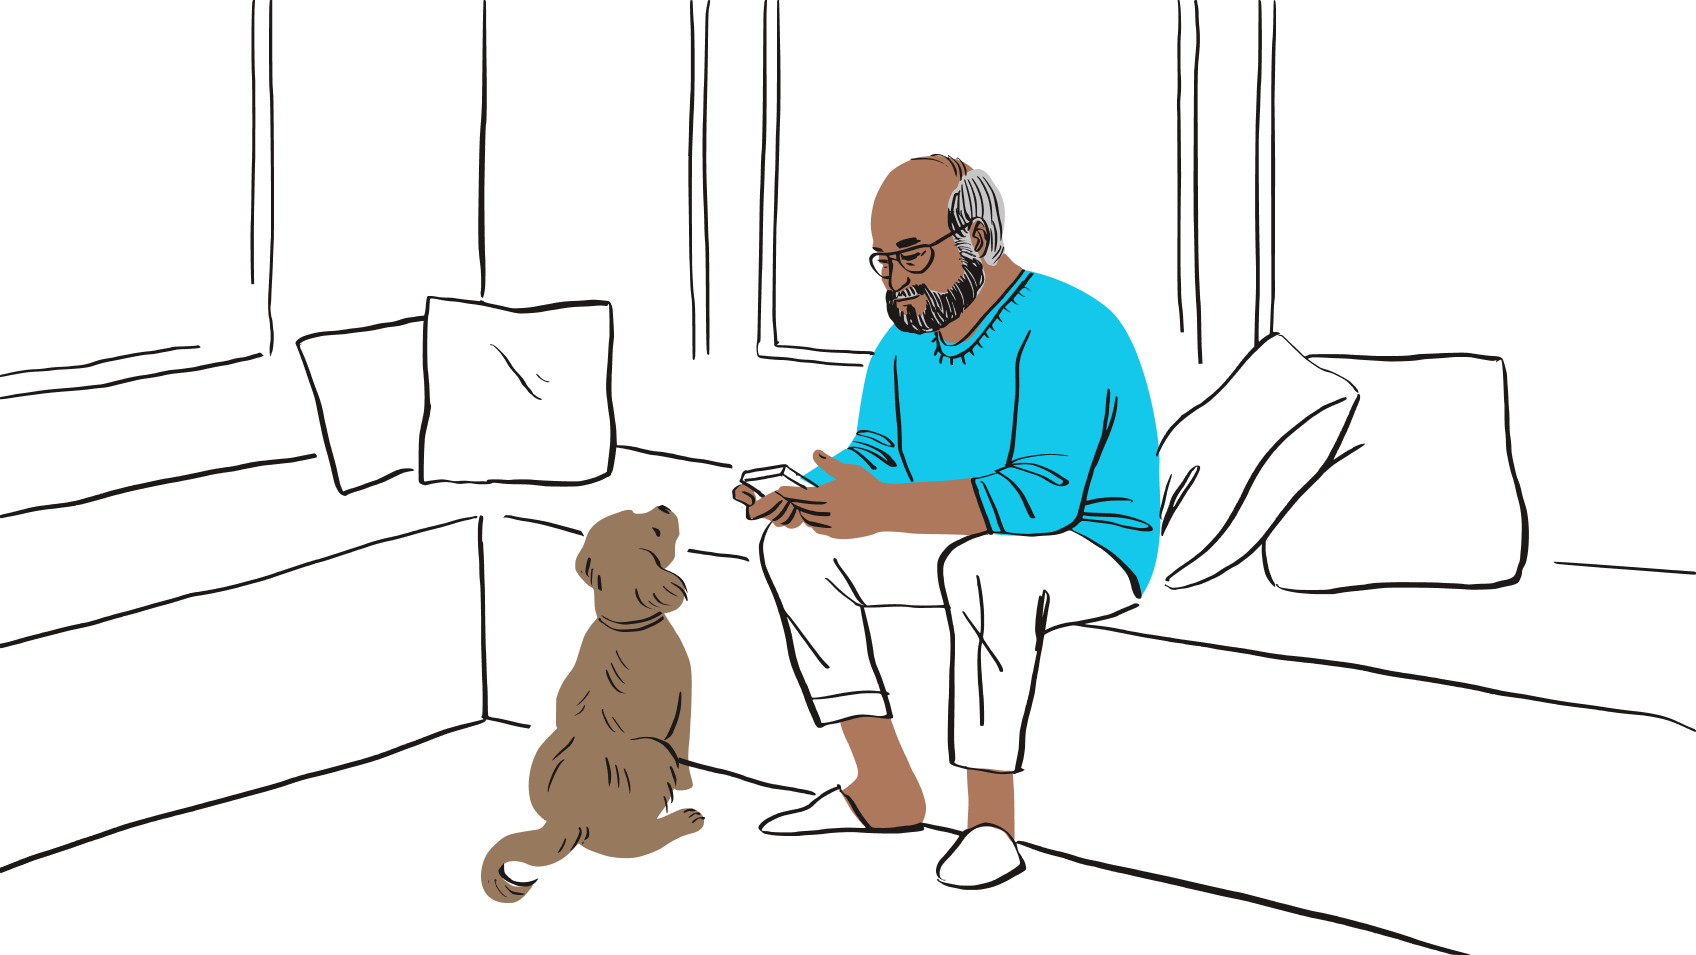 A man sits on a bench, looking at phone, with a dog looking up at him